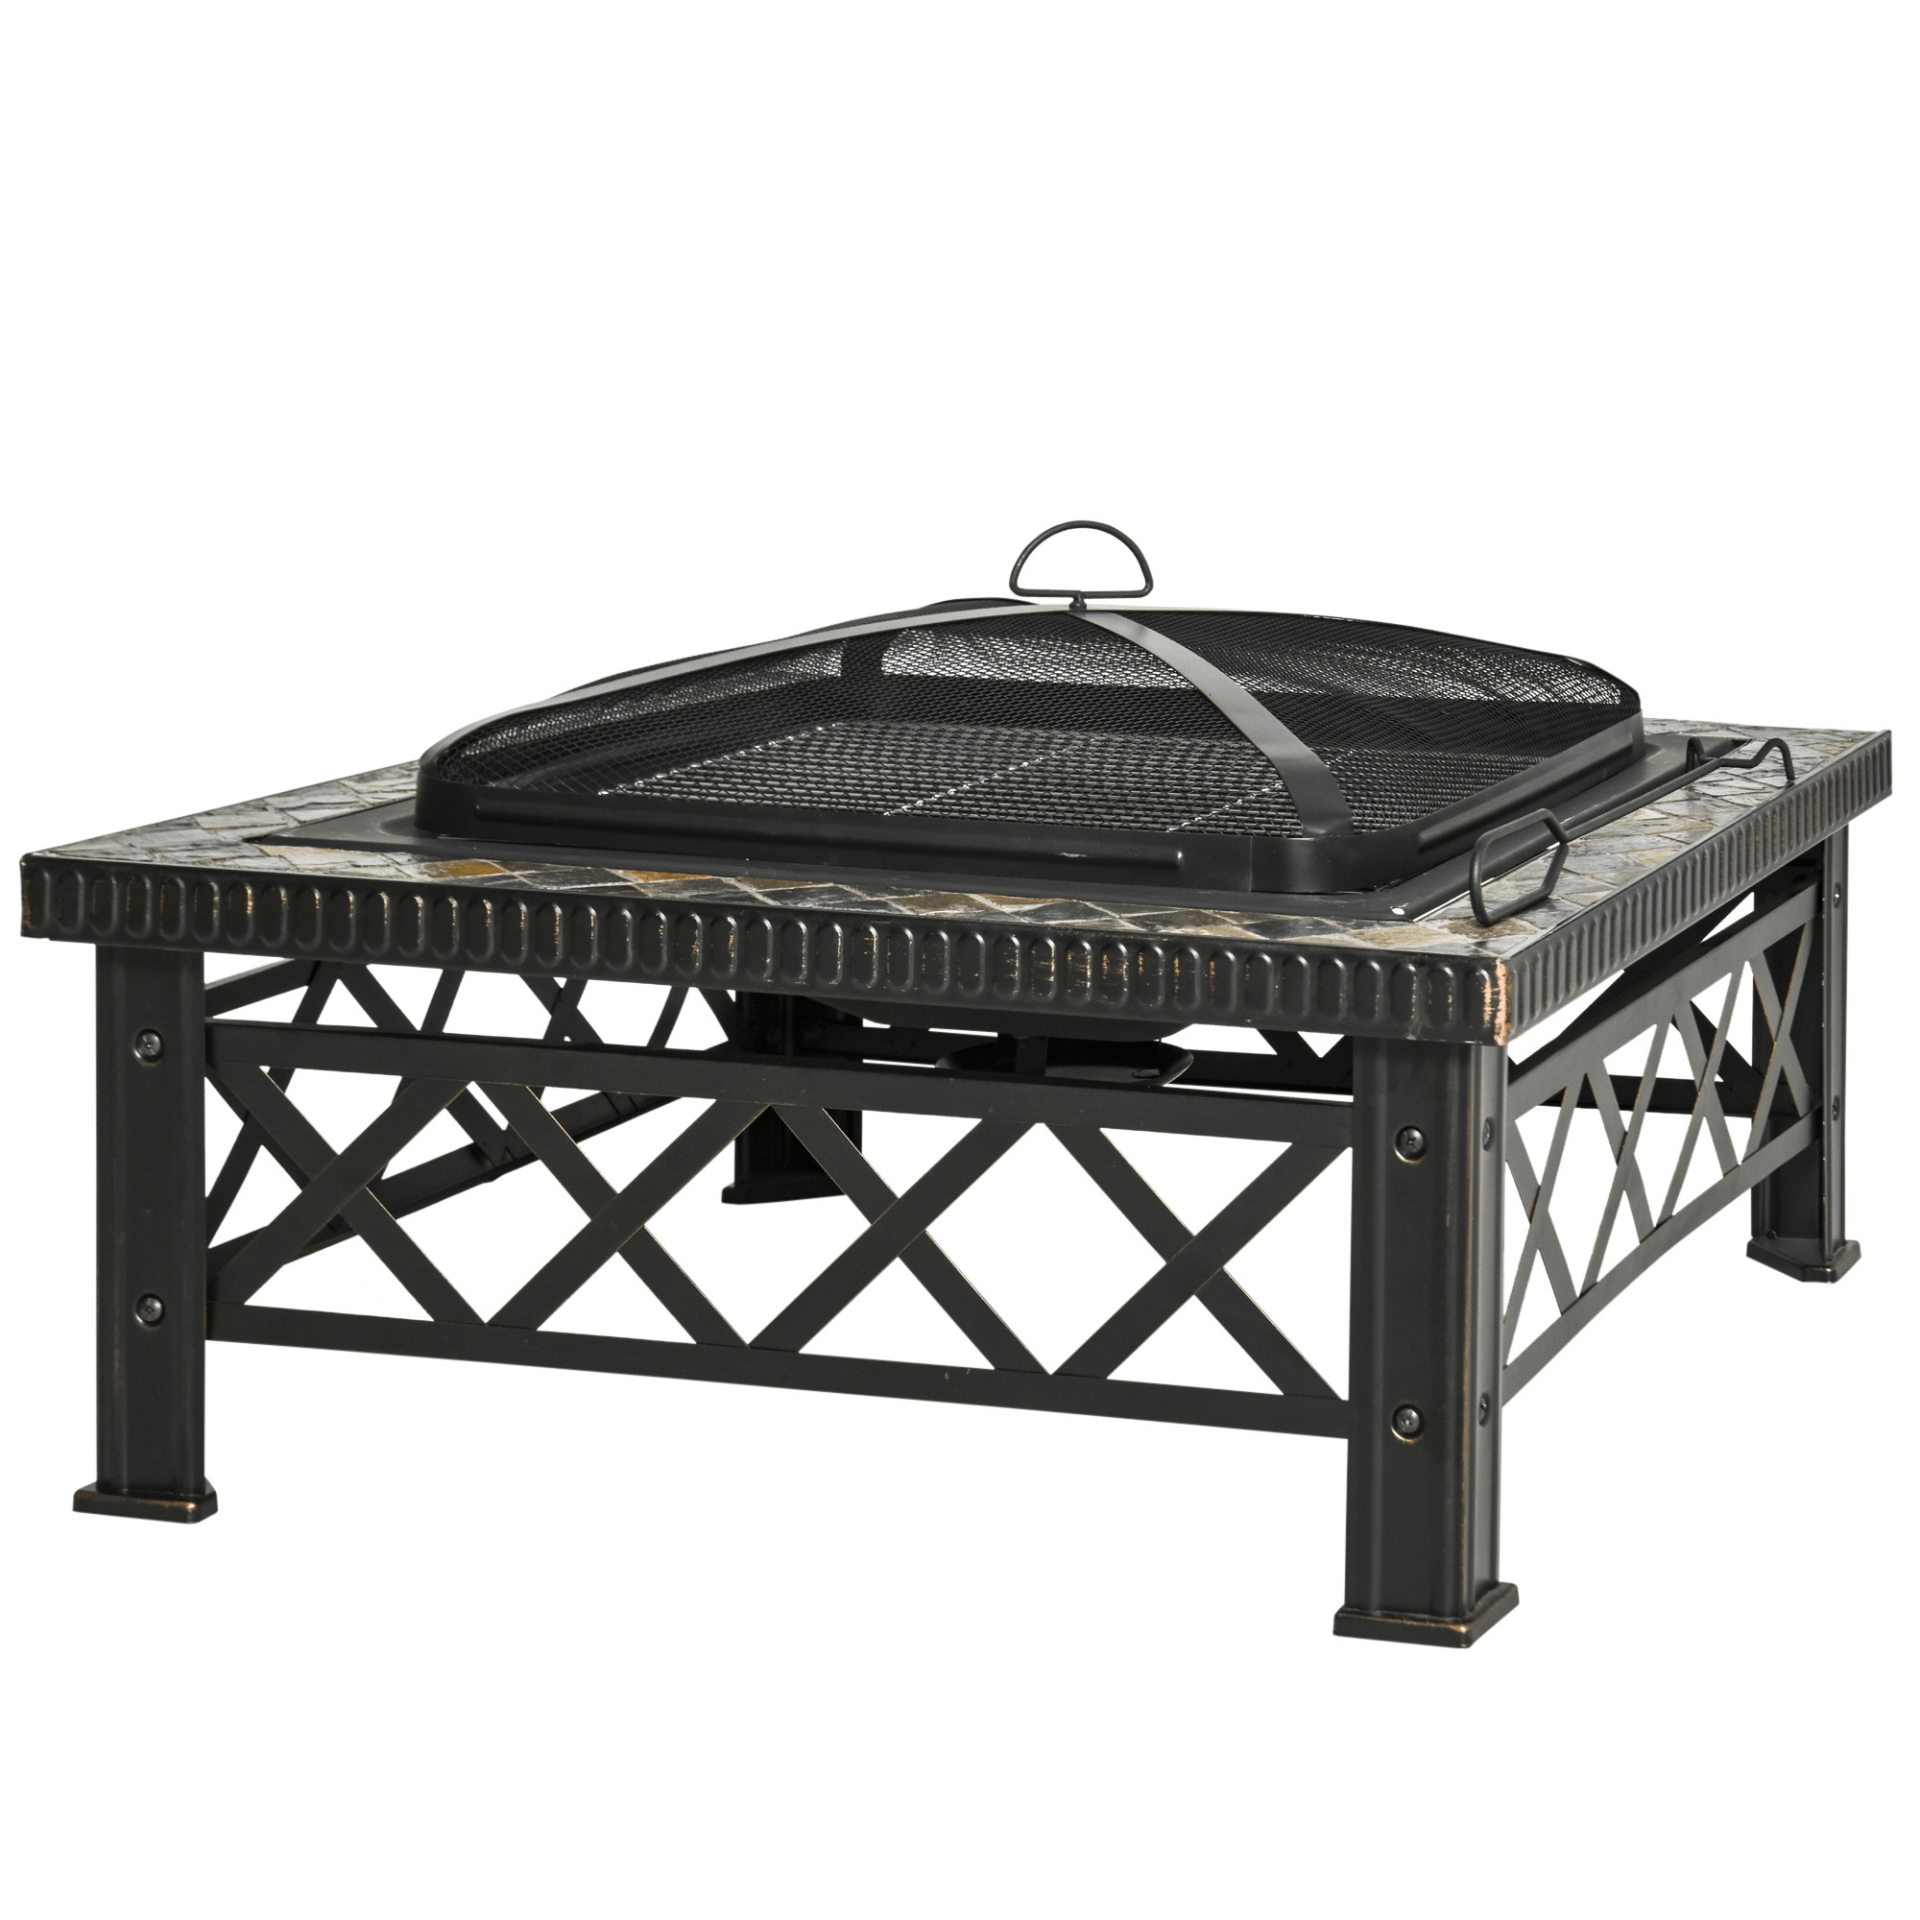 Outsunny Metal Large Firepit Outdoor 3 in 1 Square Fire Pit Brazier - Black Firepit Cosy Camping Co. Black  